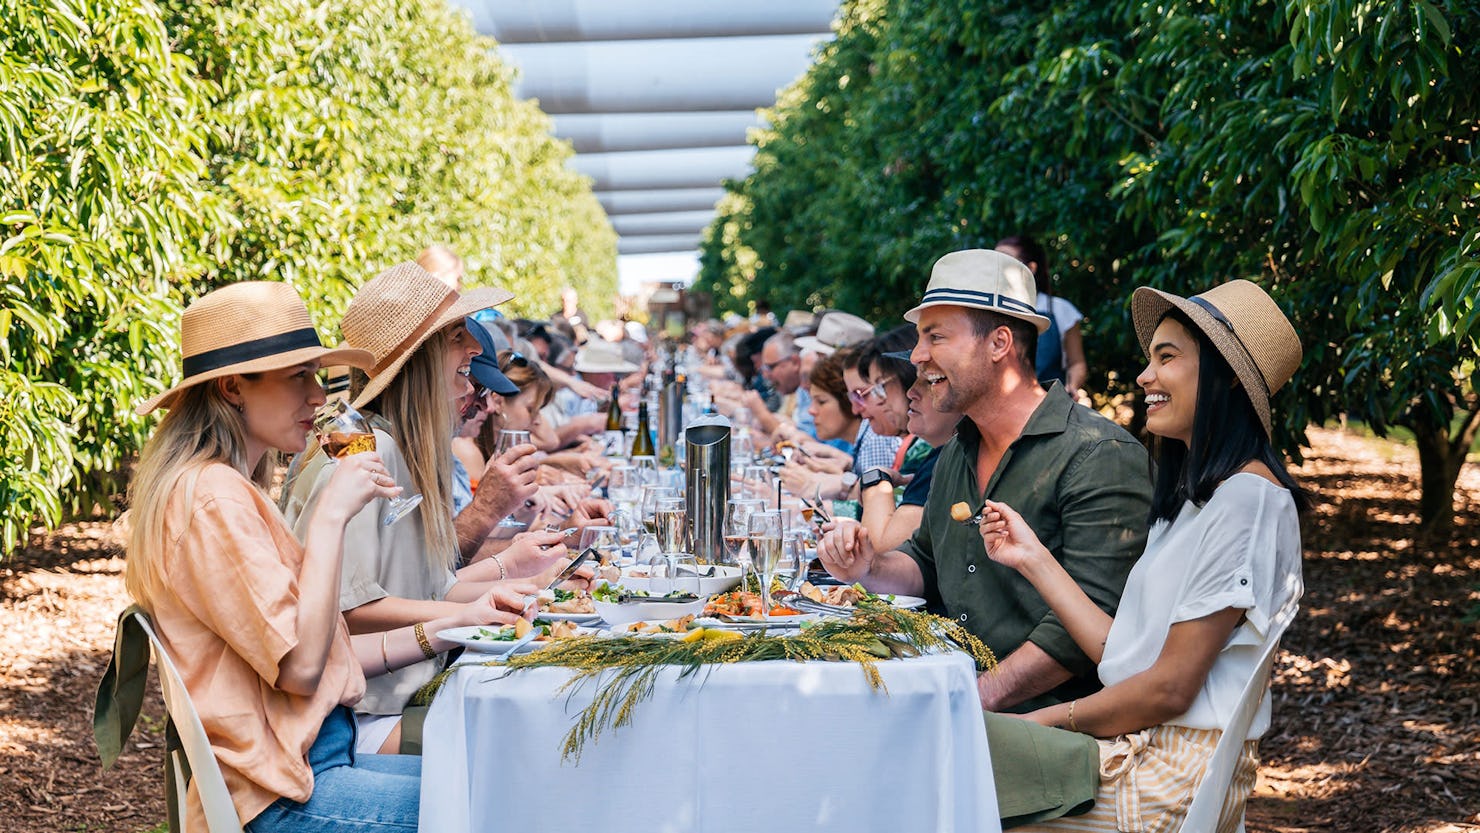 Long Table Lunch, The Curated Plate. Credit: Tourism & Events Queensland